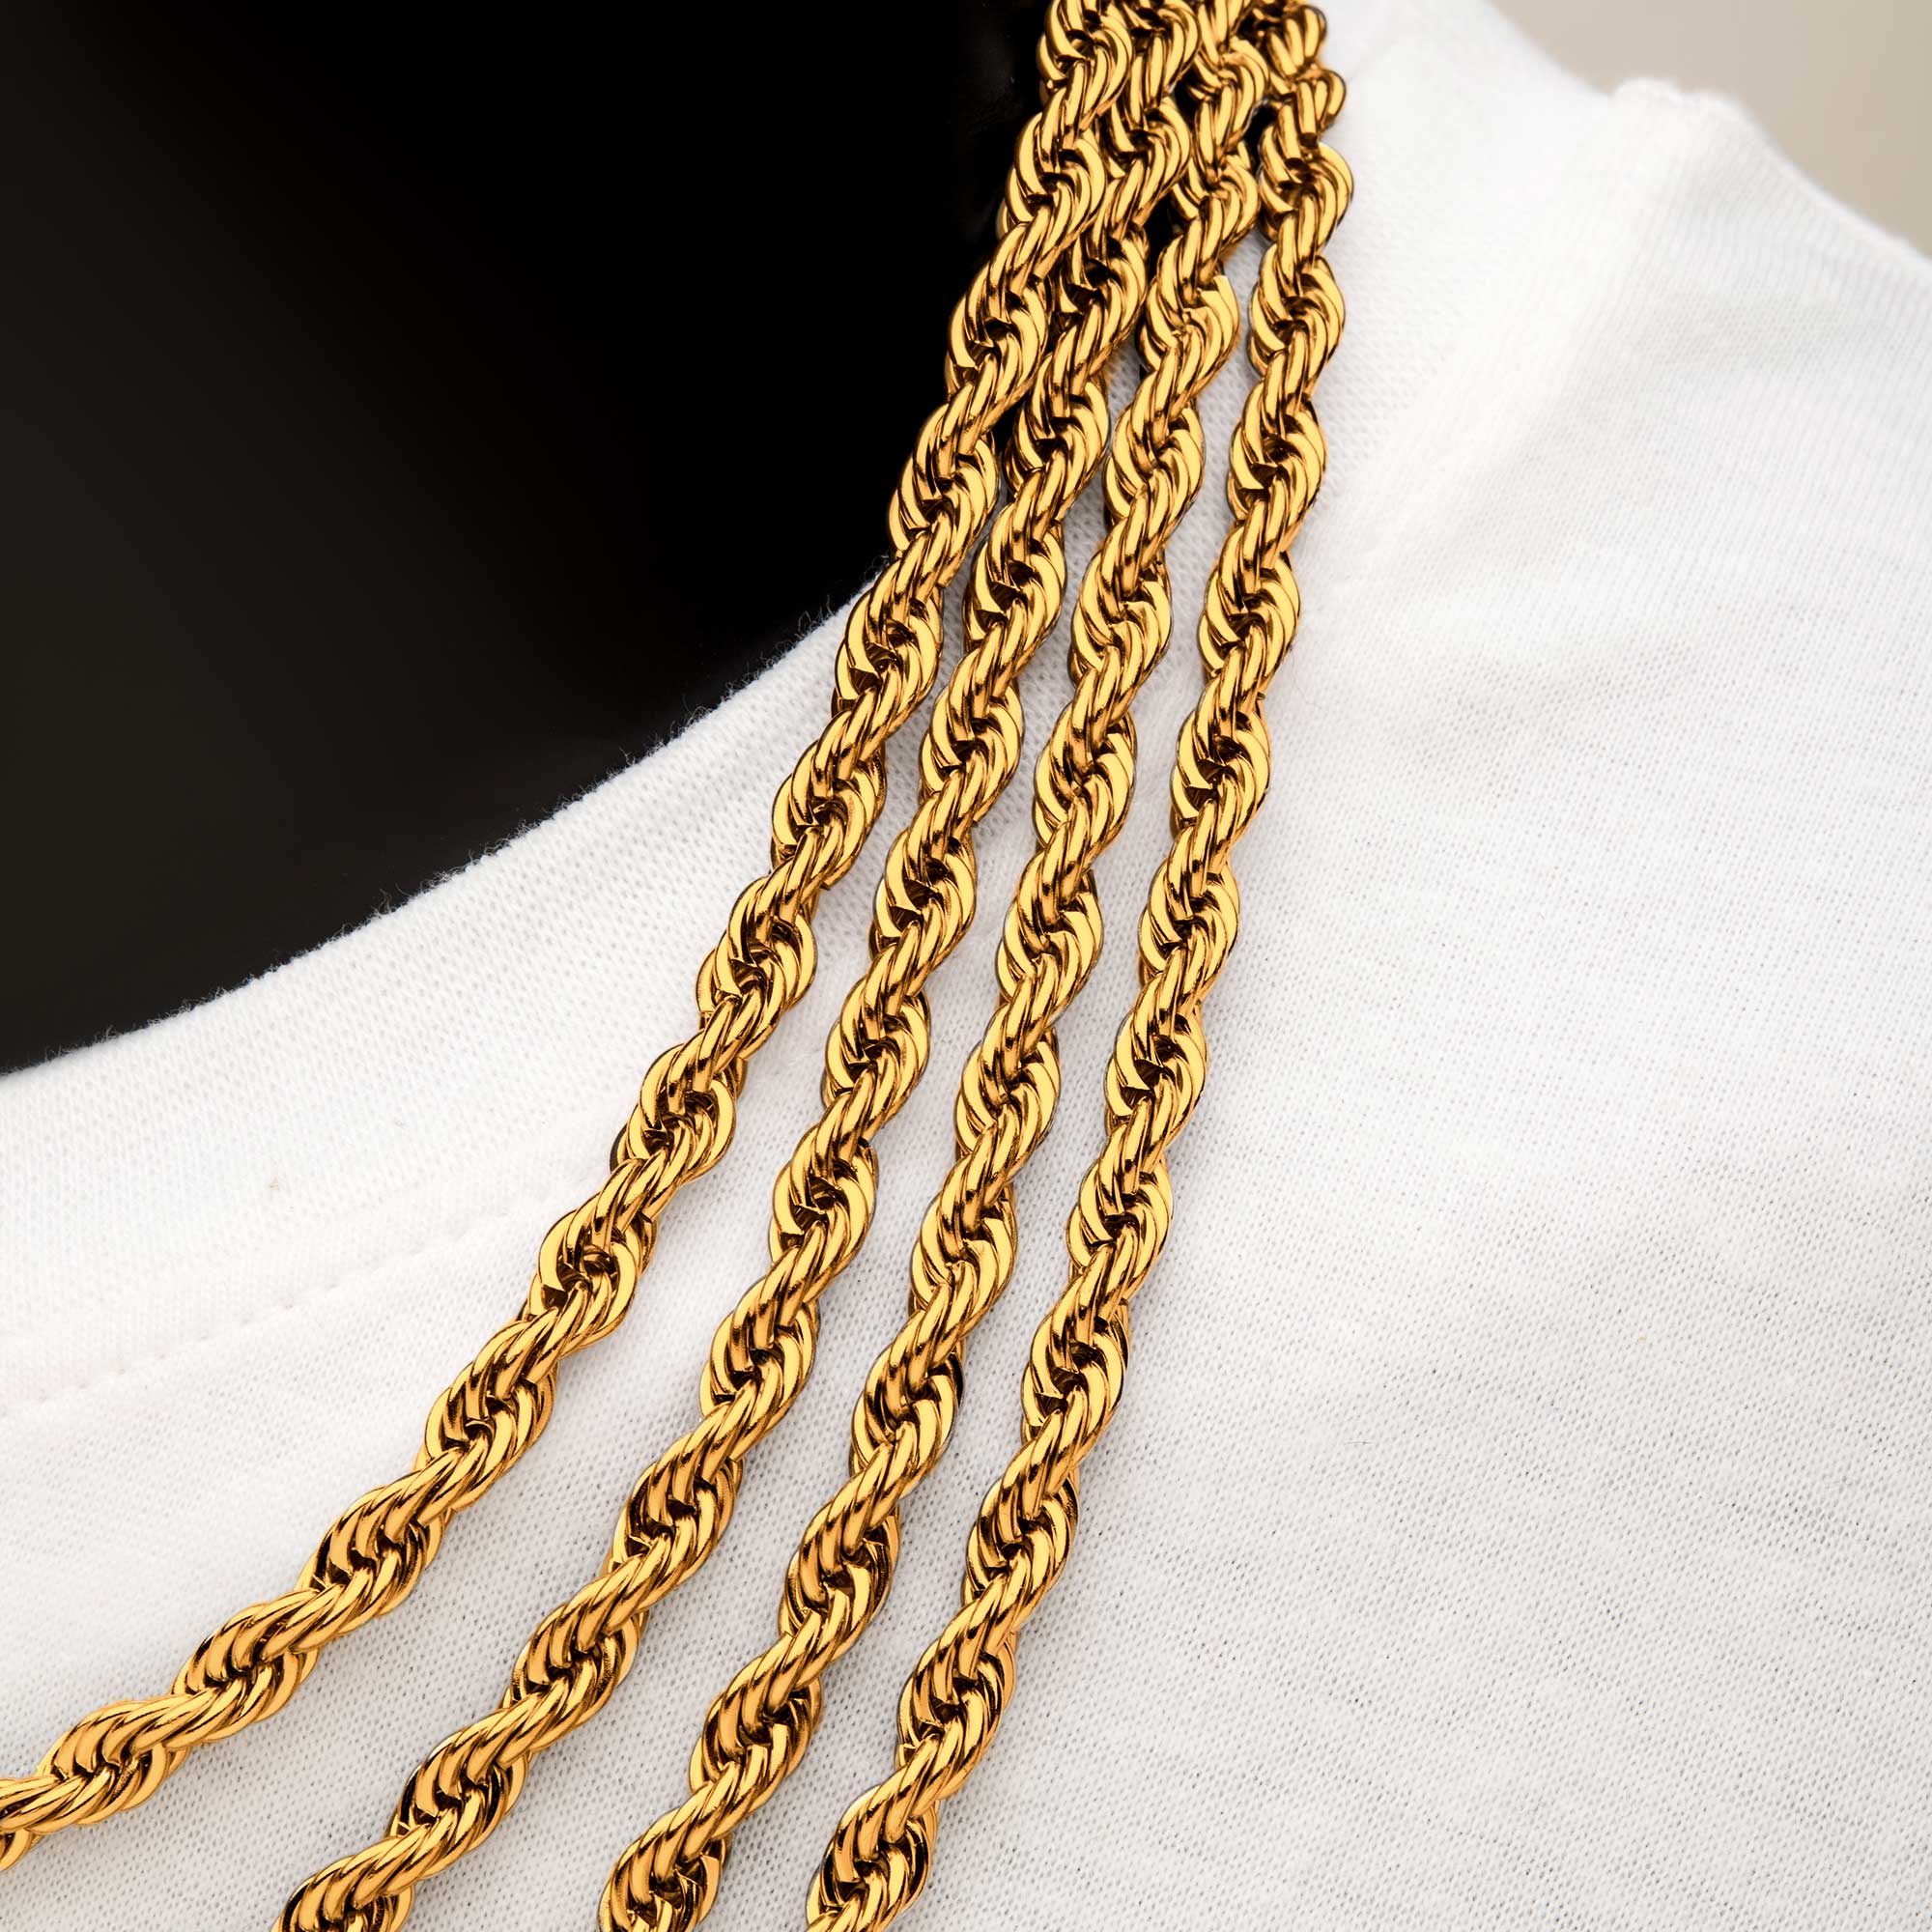 6mm 18K Gold Plated Rope Chain Image 4 P.K. Bennett Jewelers Mundelein, IL